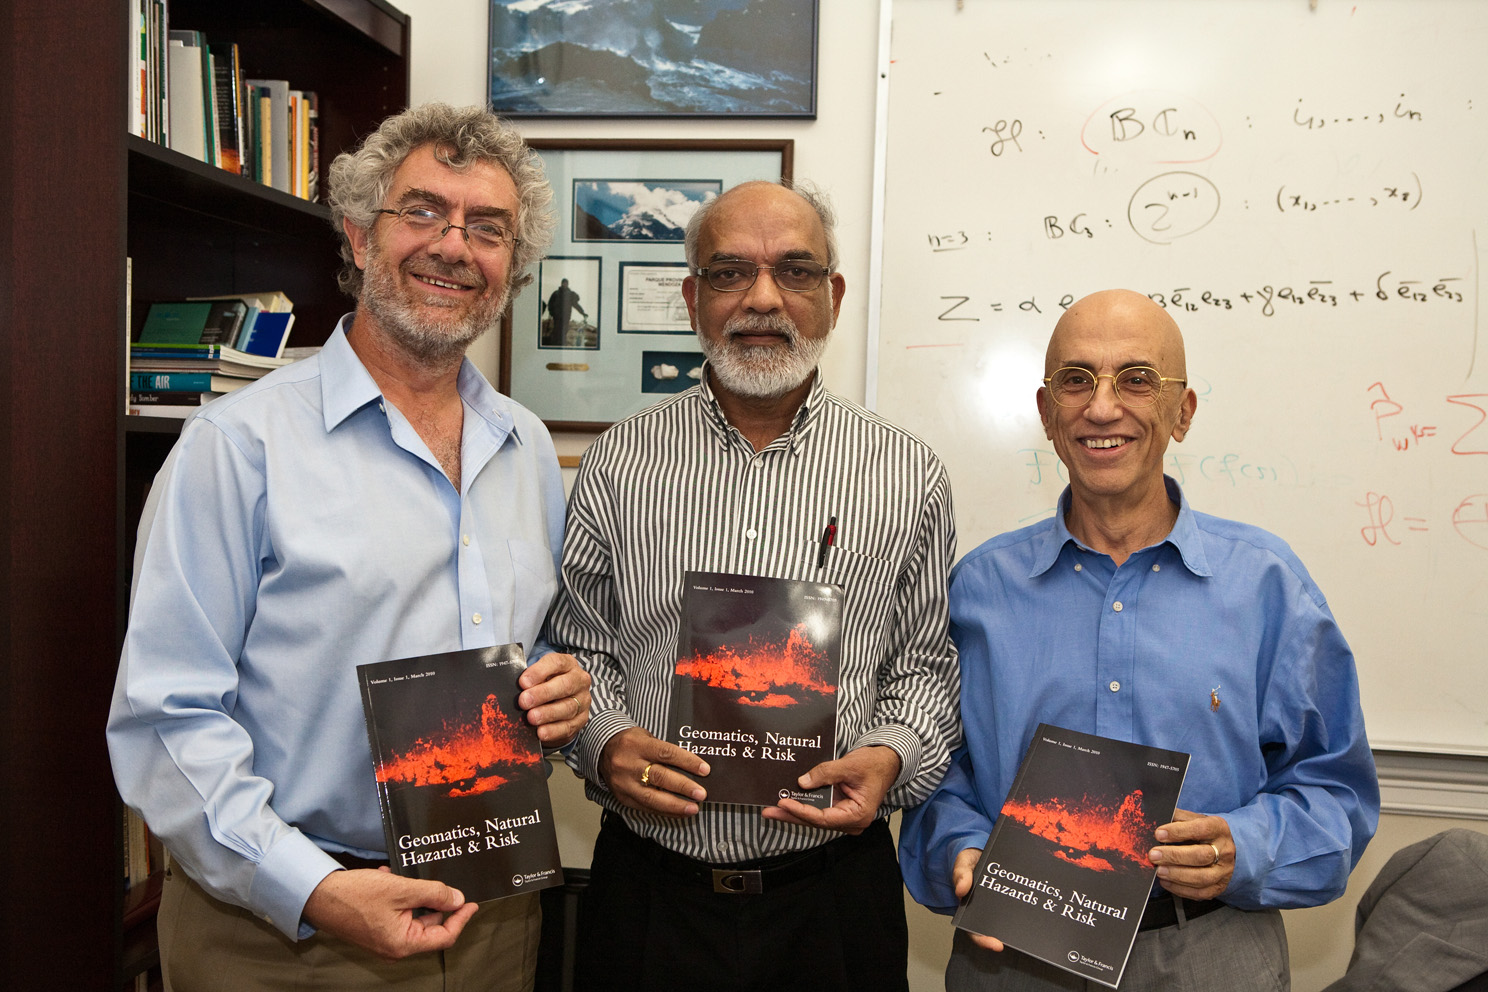 Chancellor Daniele Struppa, Dr. Ramesh Singh and Dr. Menas Kafatos, dean of the Schmid College of Science, show off the new journal edited by Dr. Singh.